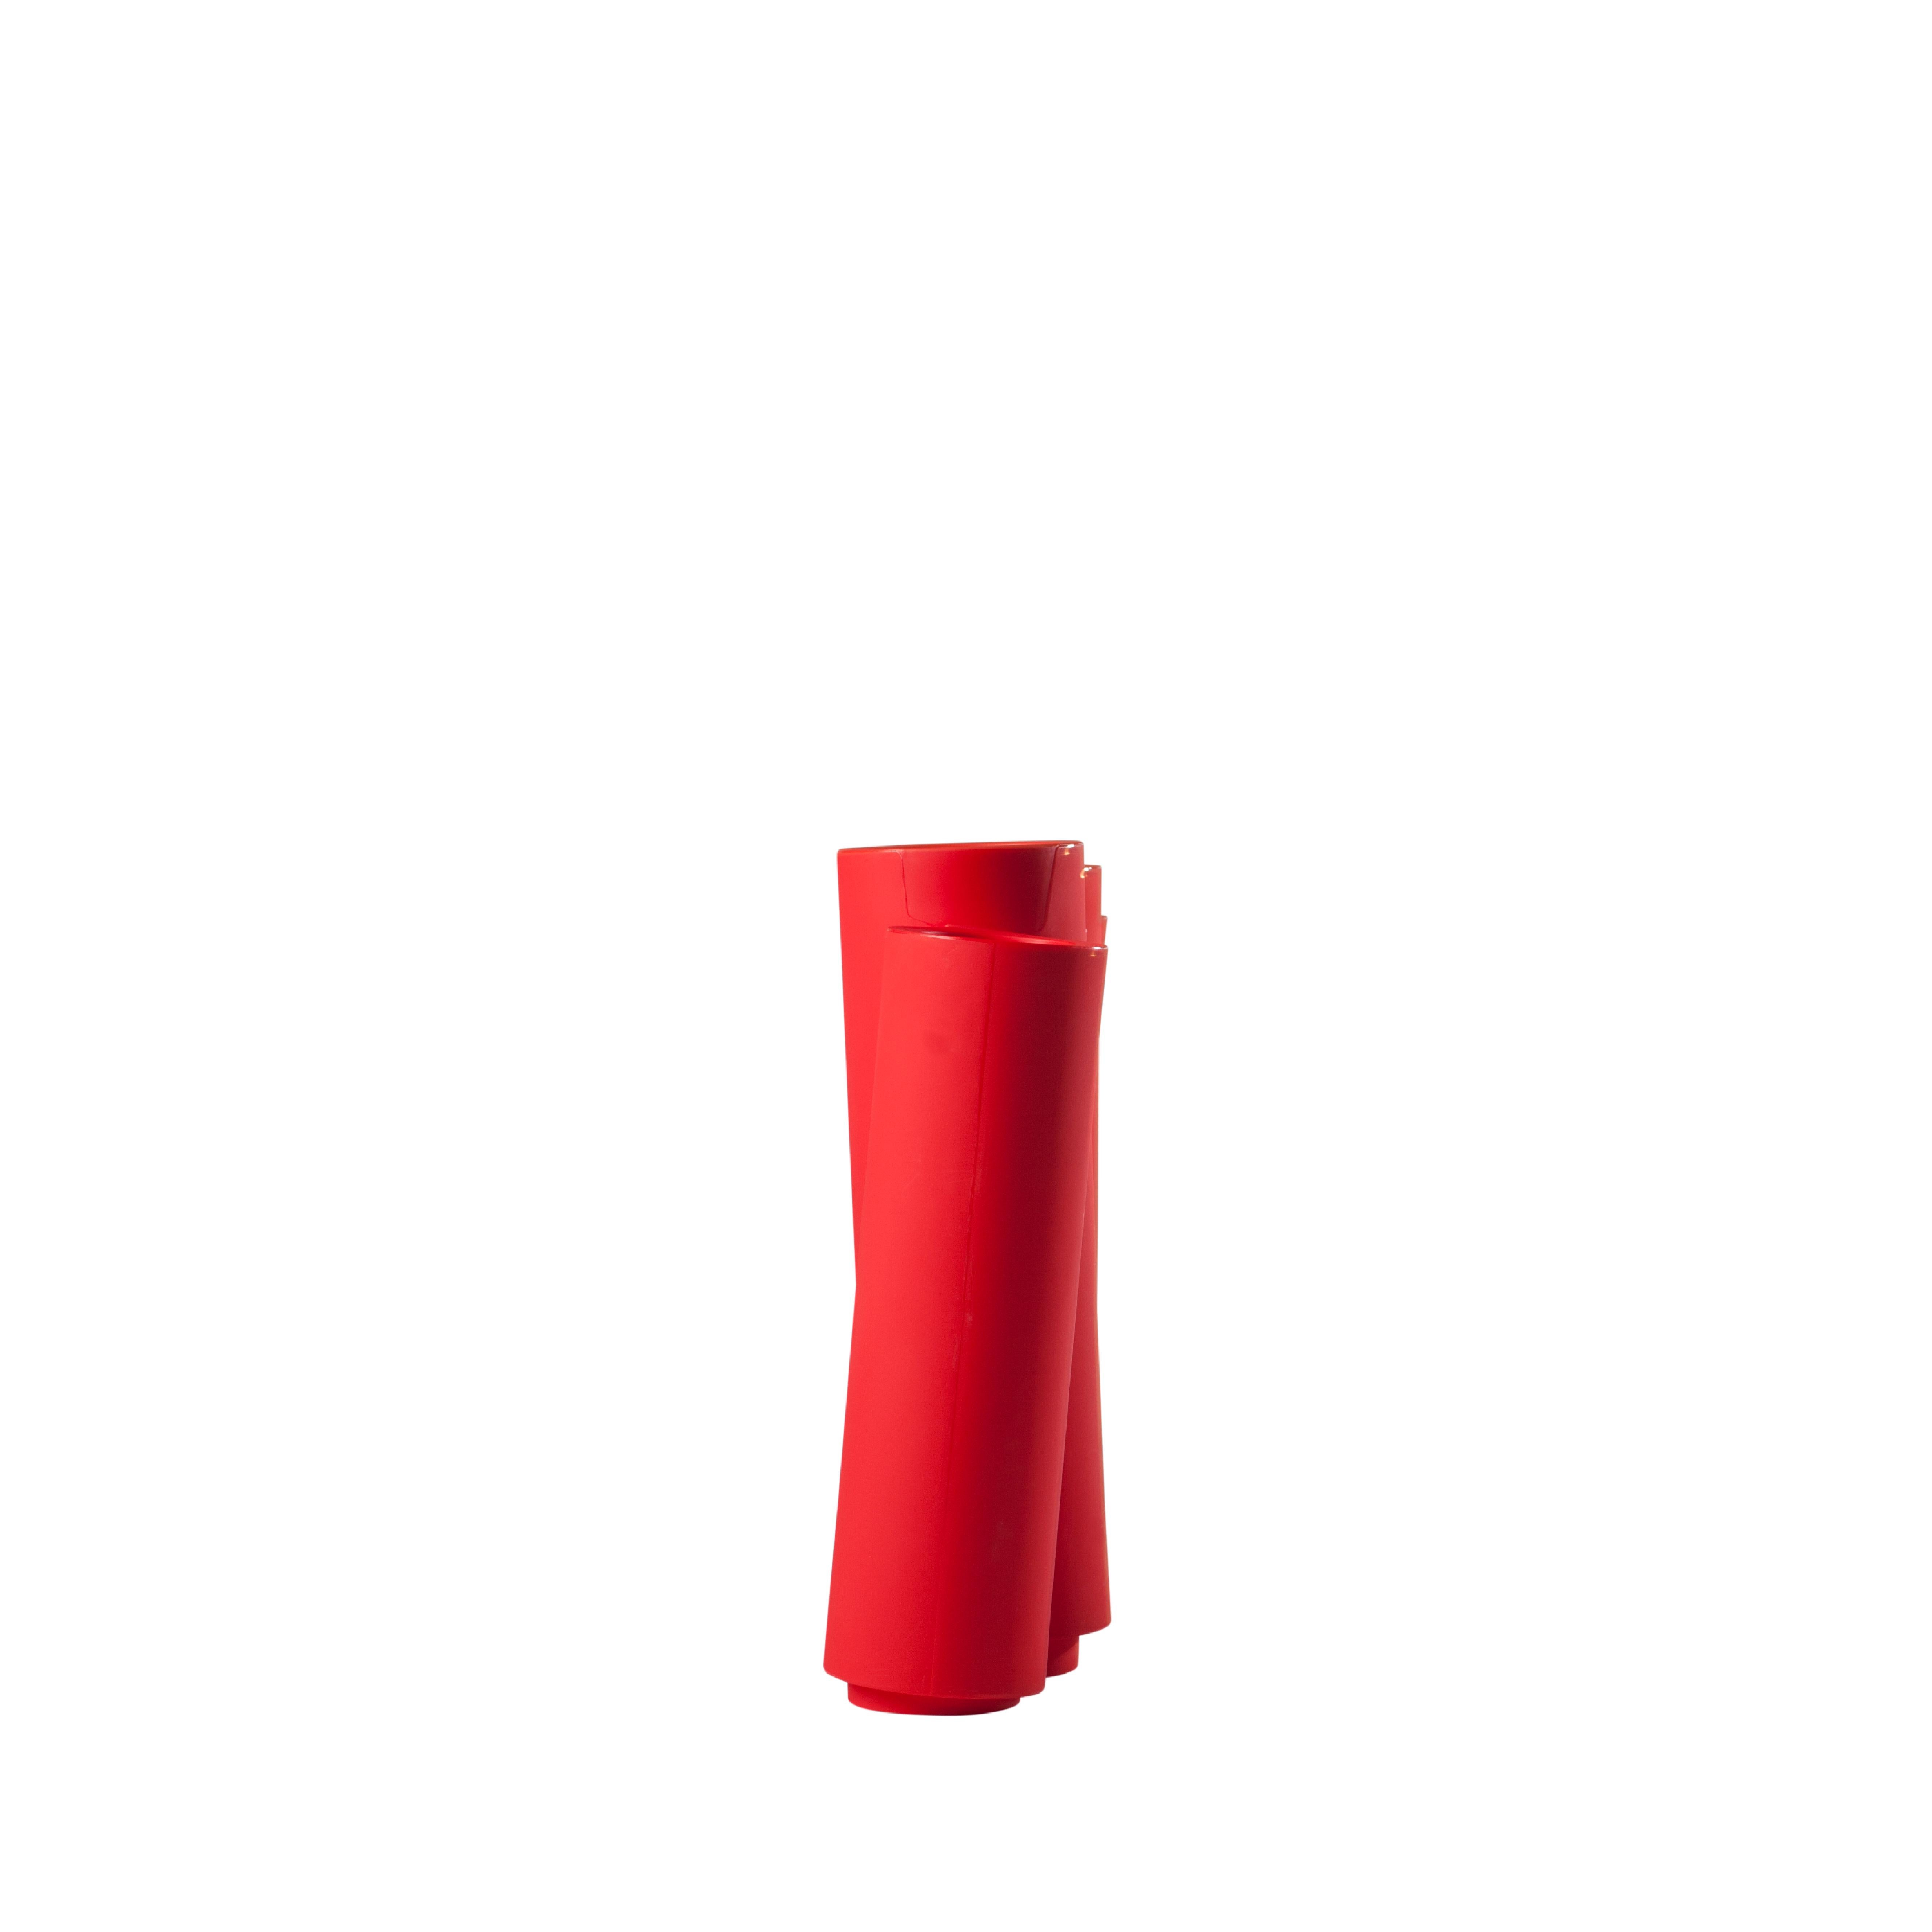 Italian Slide Design Bamboo Cachepot in Flame Red by Tous Les Trois For Sale